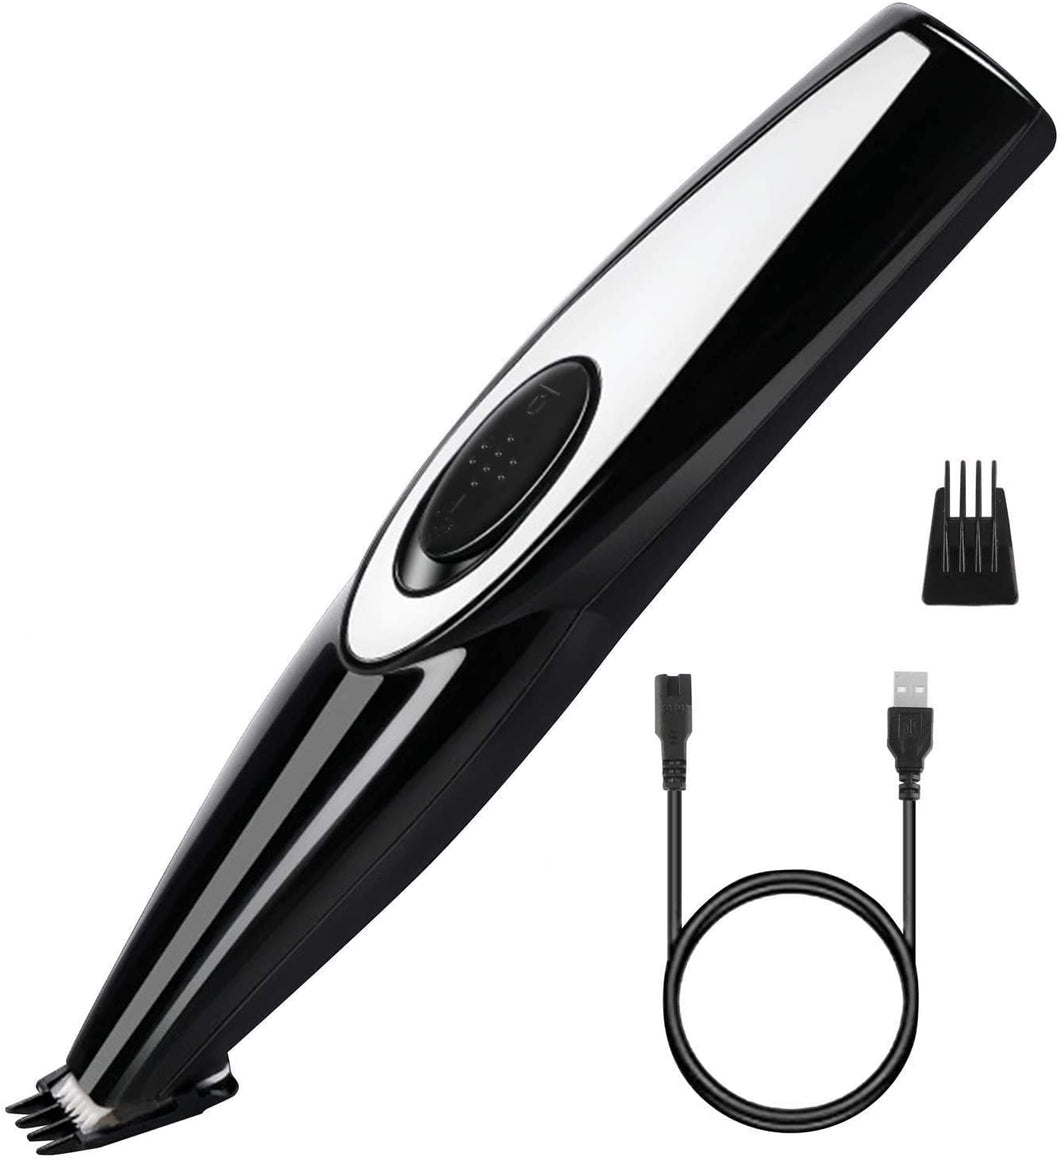 Mumoo Bear Dog Clippers, Cordless Cat and Small Dogs Clipper, USB Rechargeable Low Nosie Electric Pet Trimmer